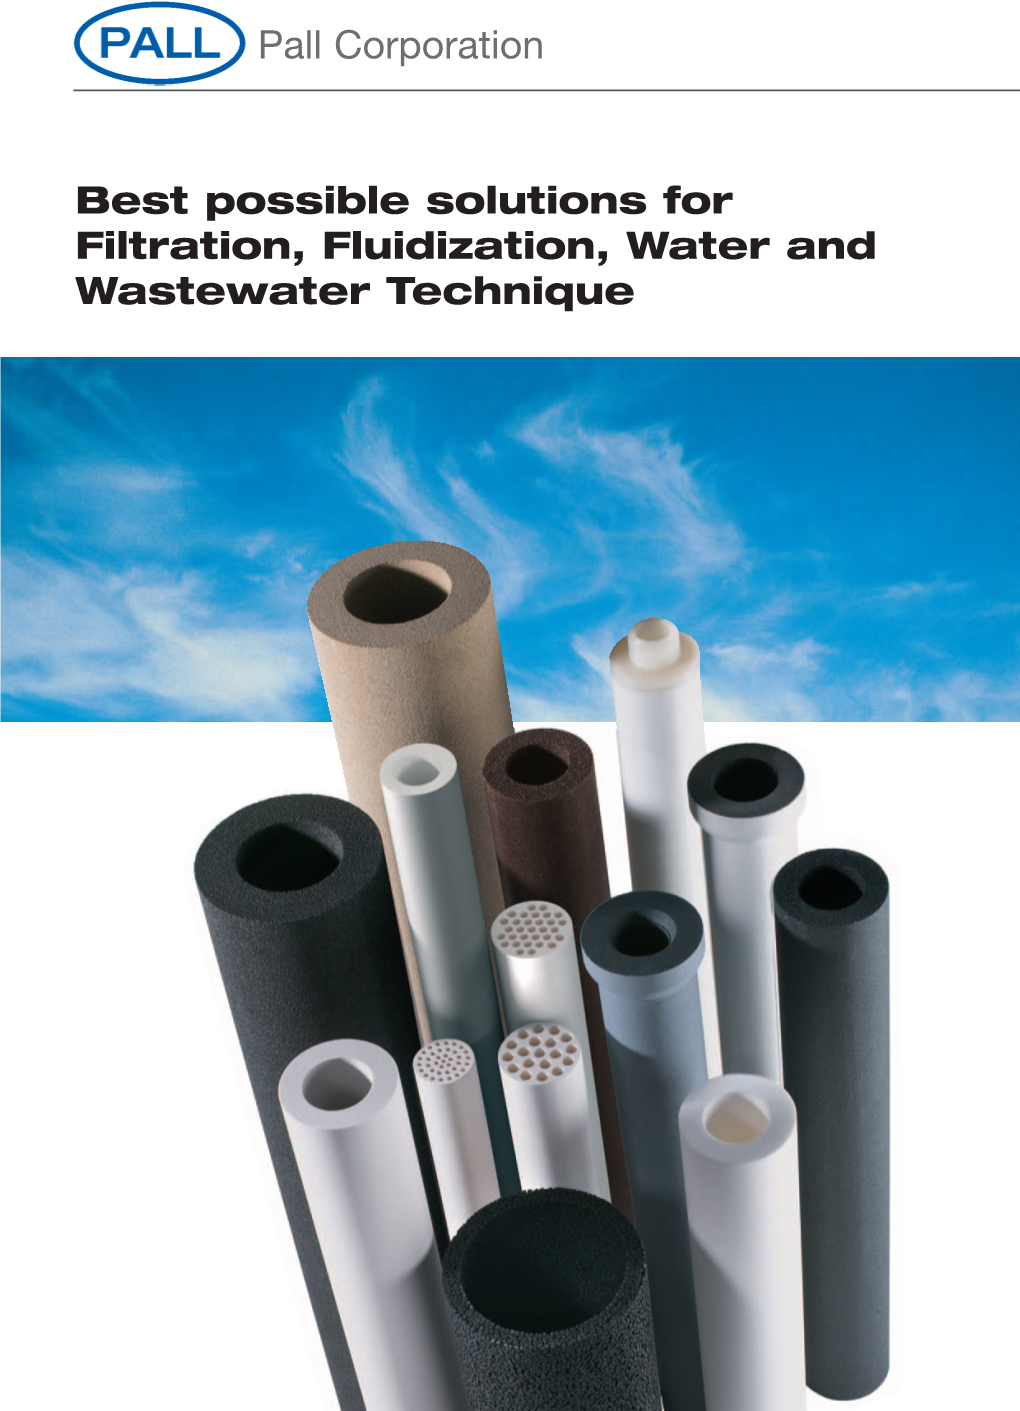 Best Possible Solutions for Filtration, Fluidization, Water and Wastewater Technique Pall Corporation